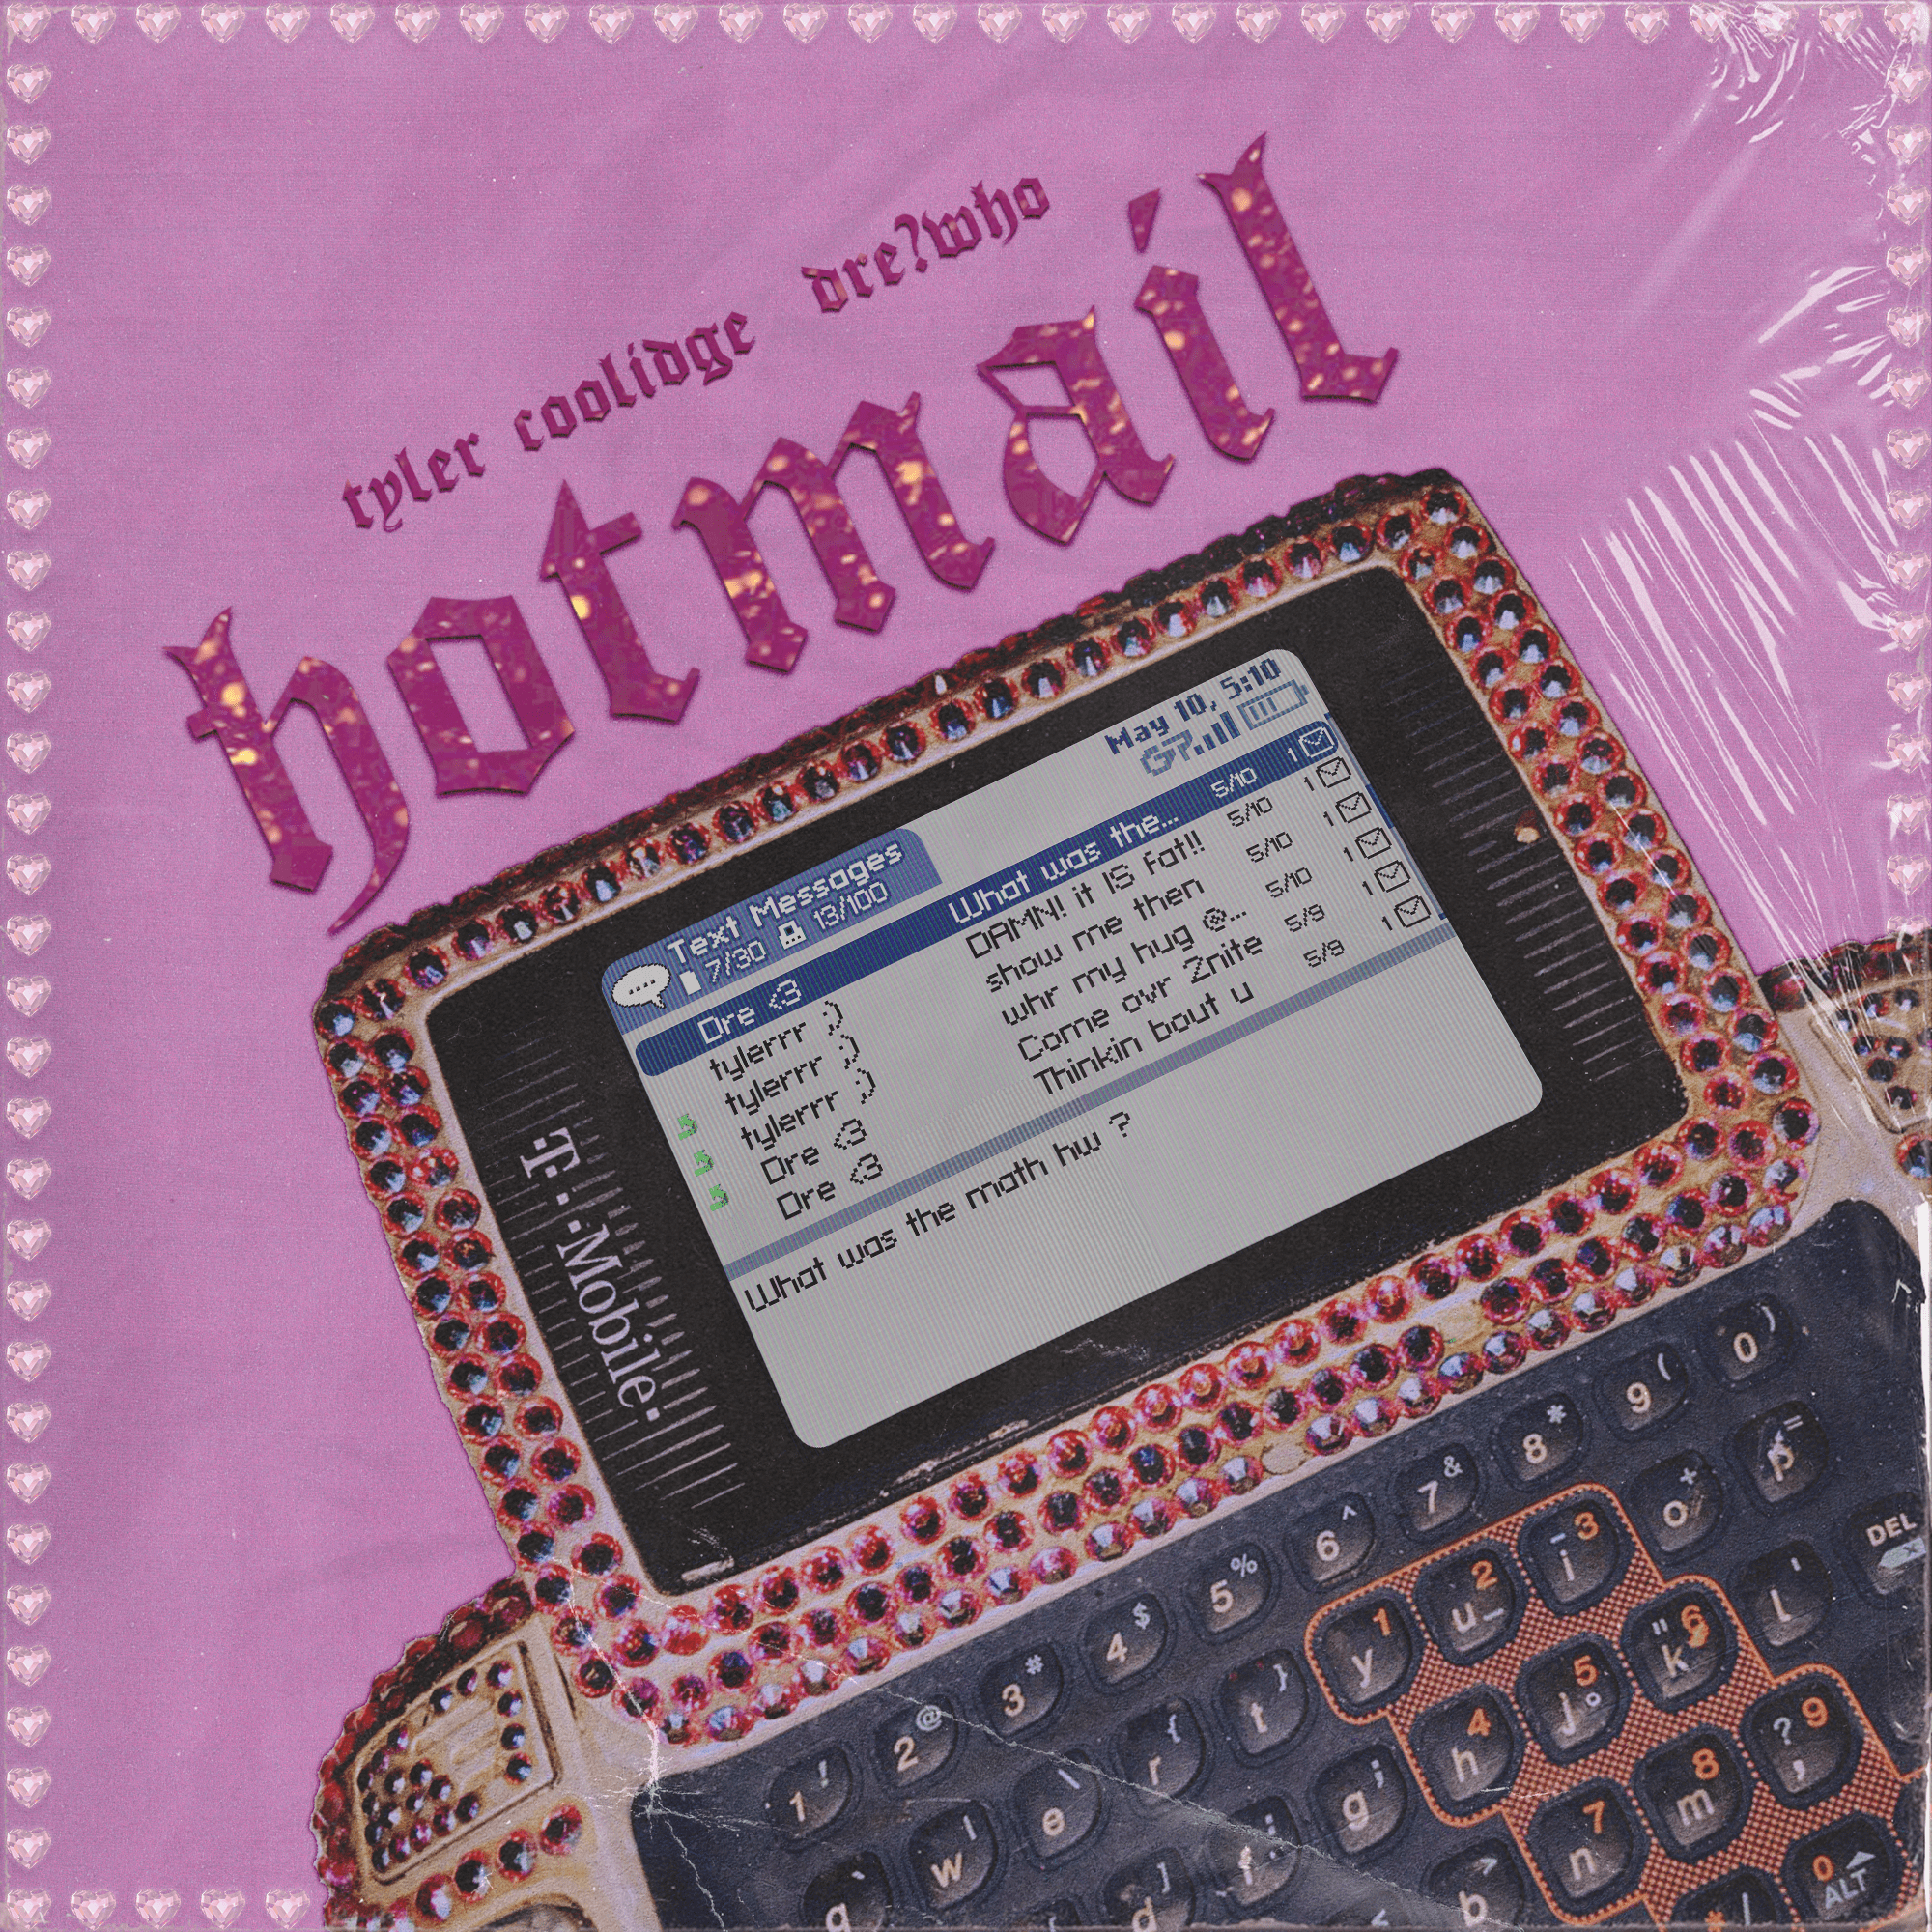 Cover art for HOTMAIL by tyler coolidge